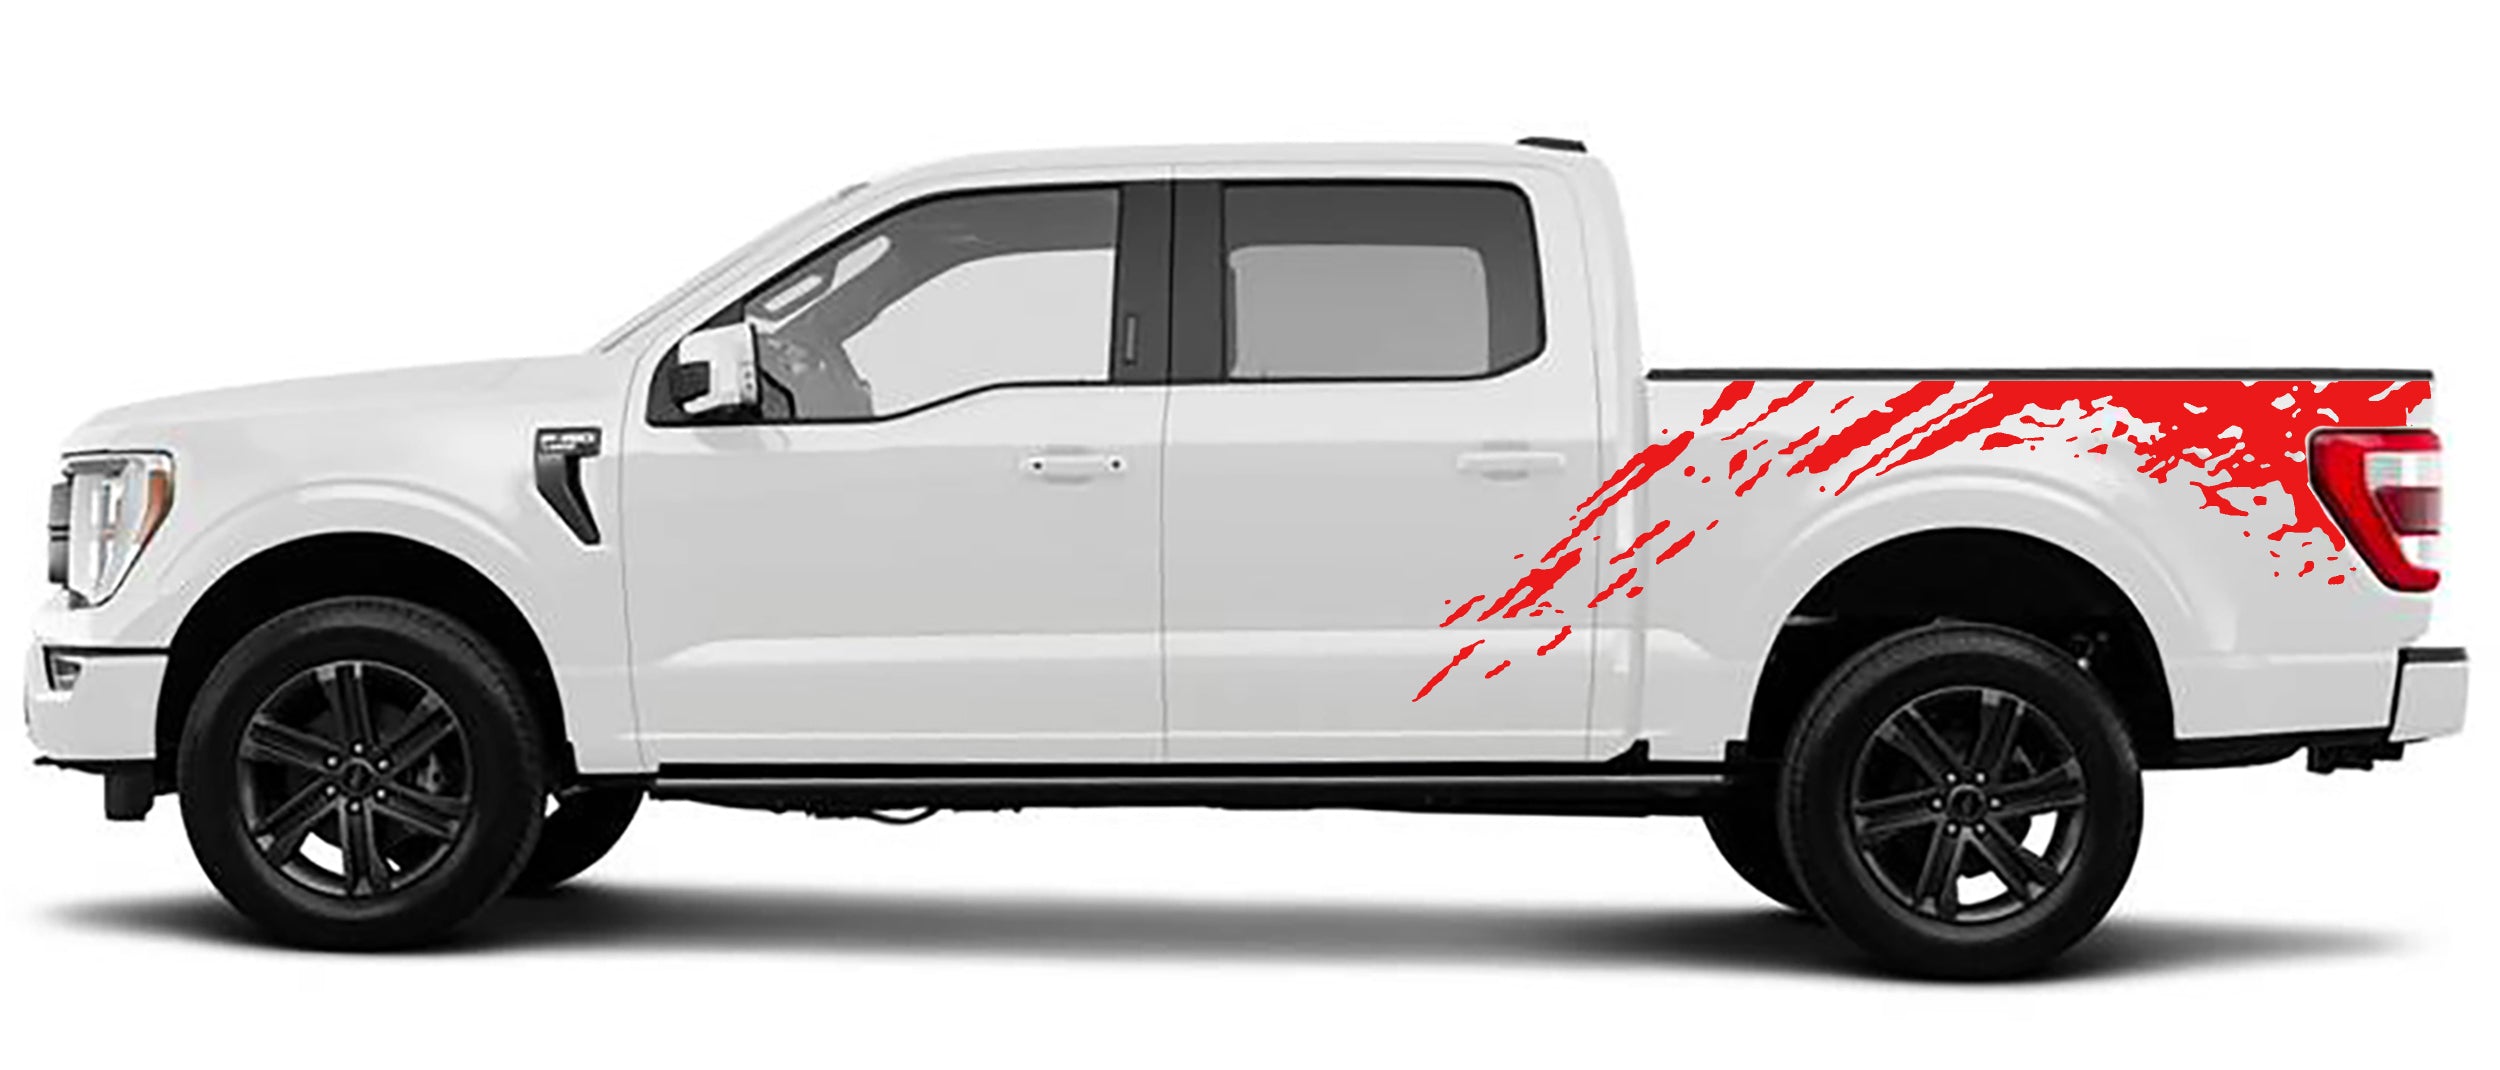 mud splash bed graphics for ford f 150 2021 to 2023 models red